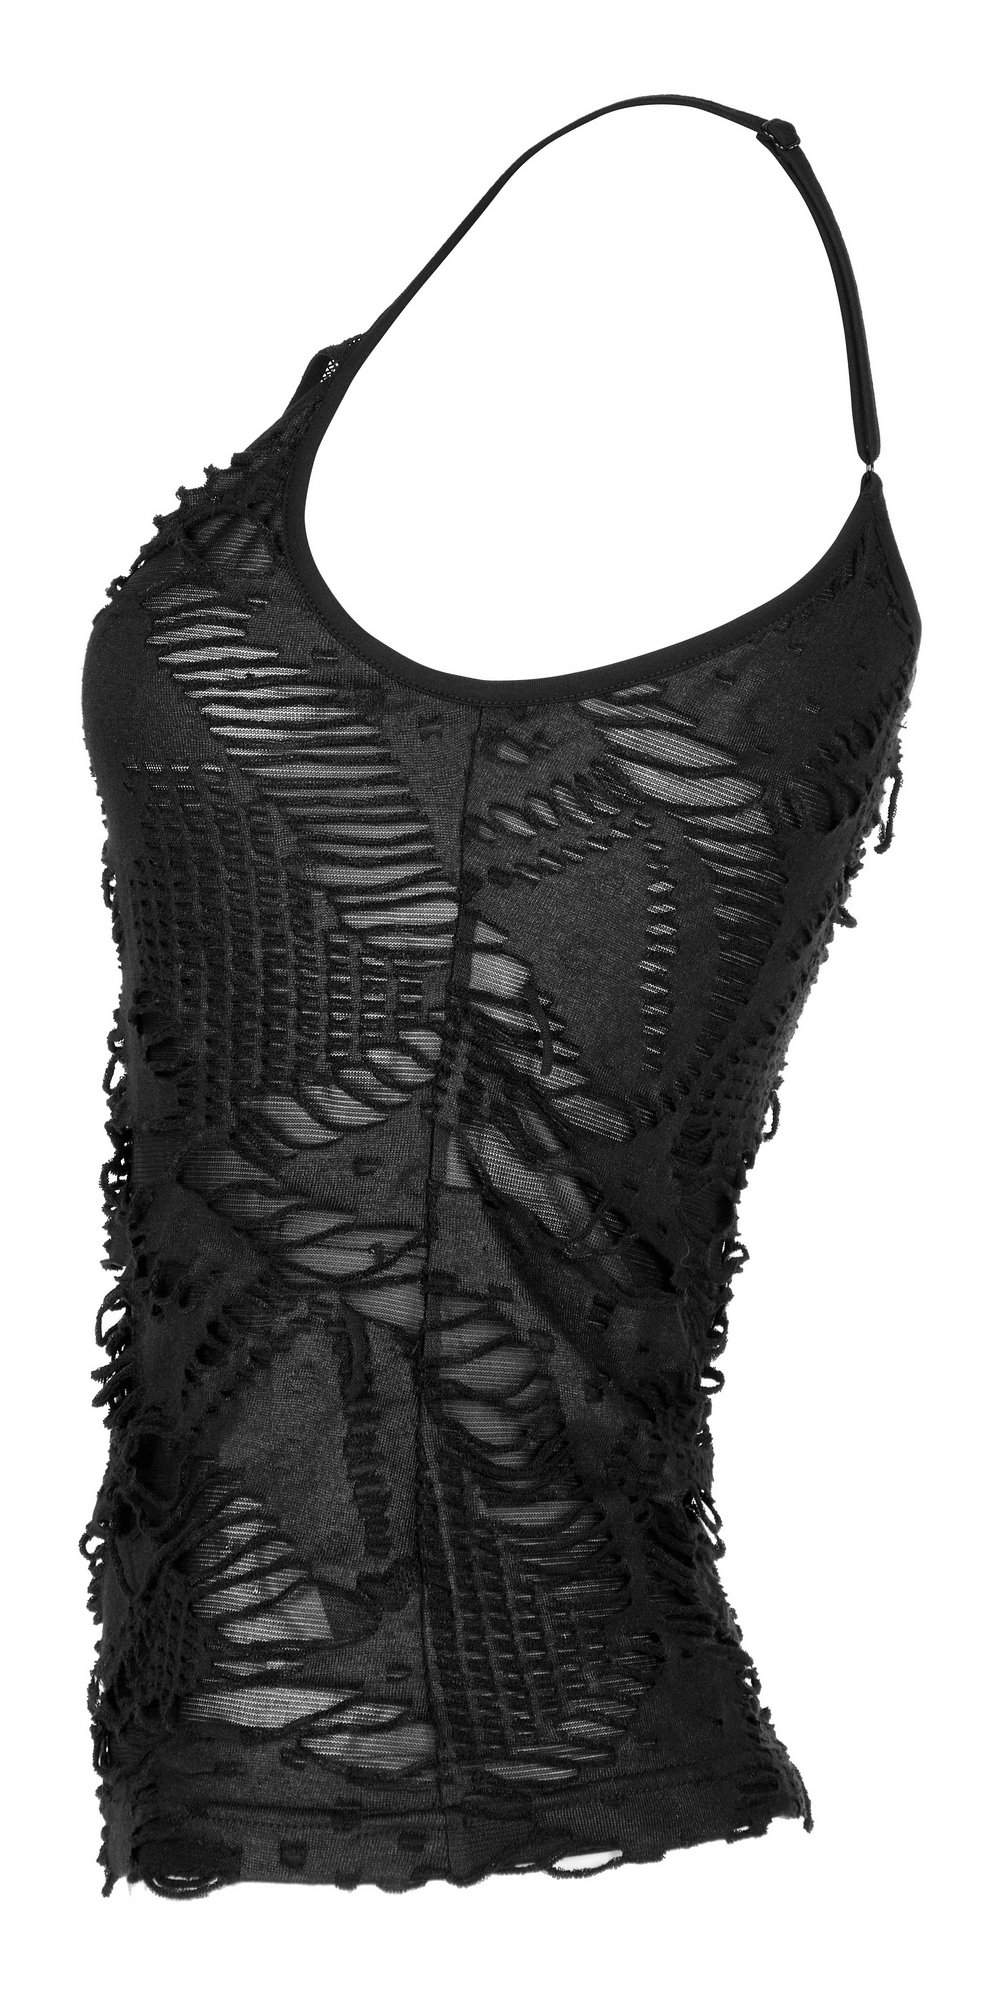 Skull Accent Gothic Lace Trim Camisole With Adjustable Straps - HARD'N'HEAVY